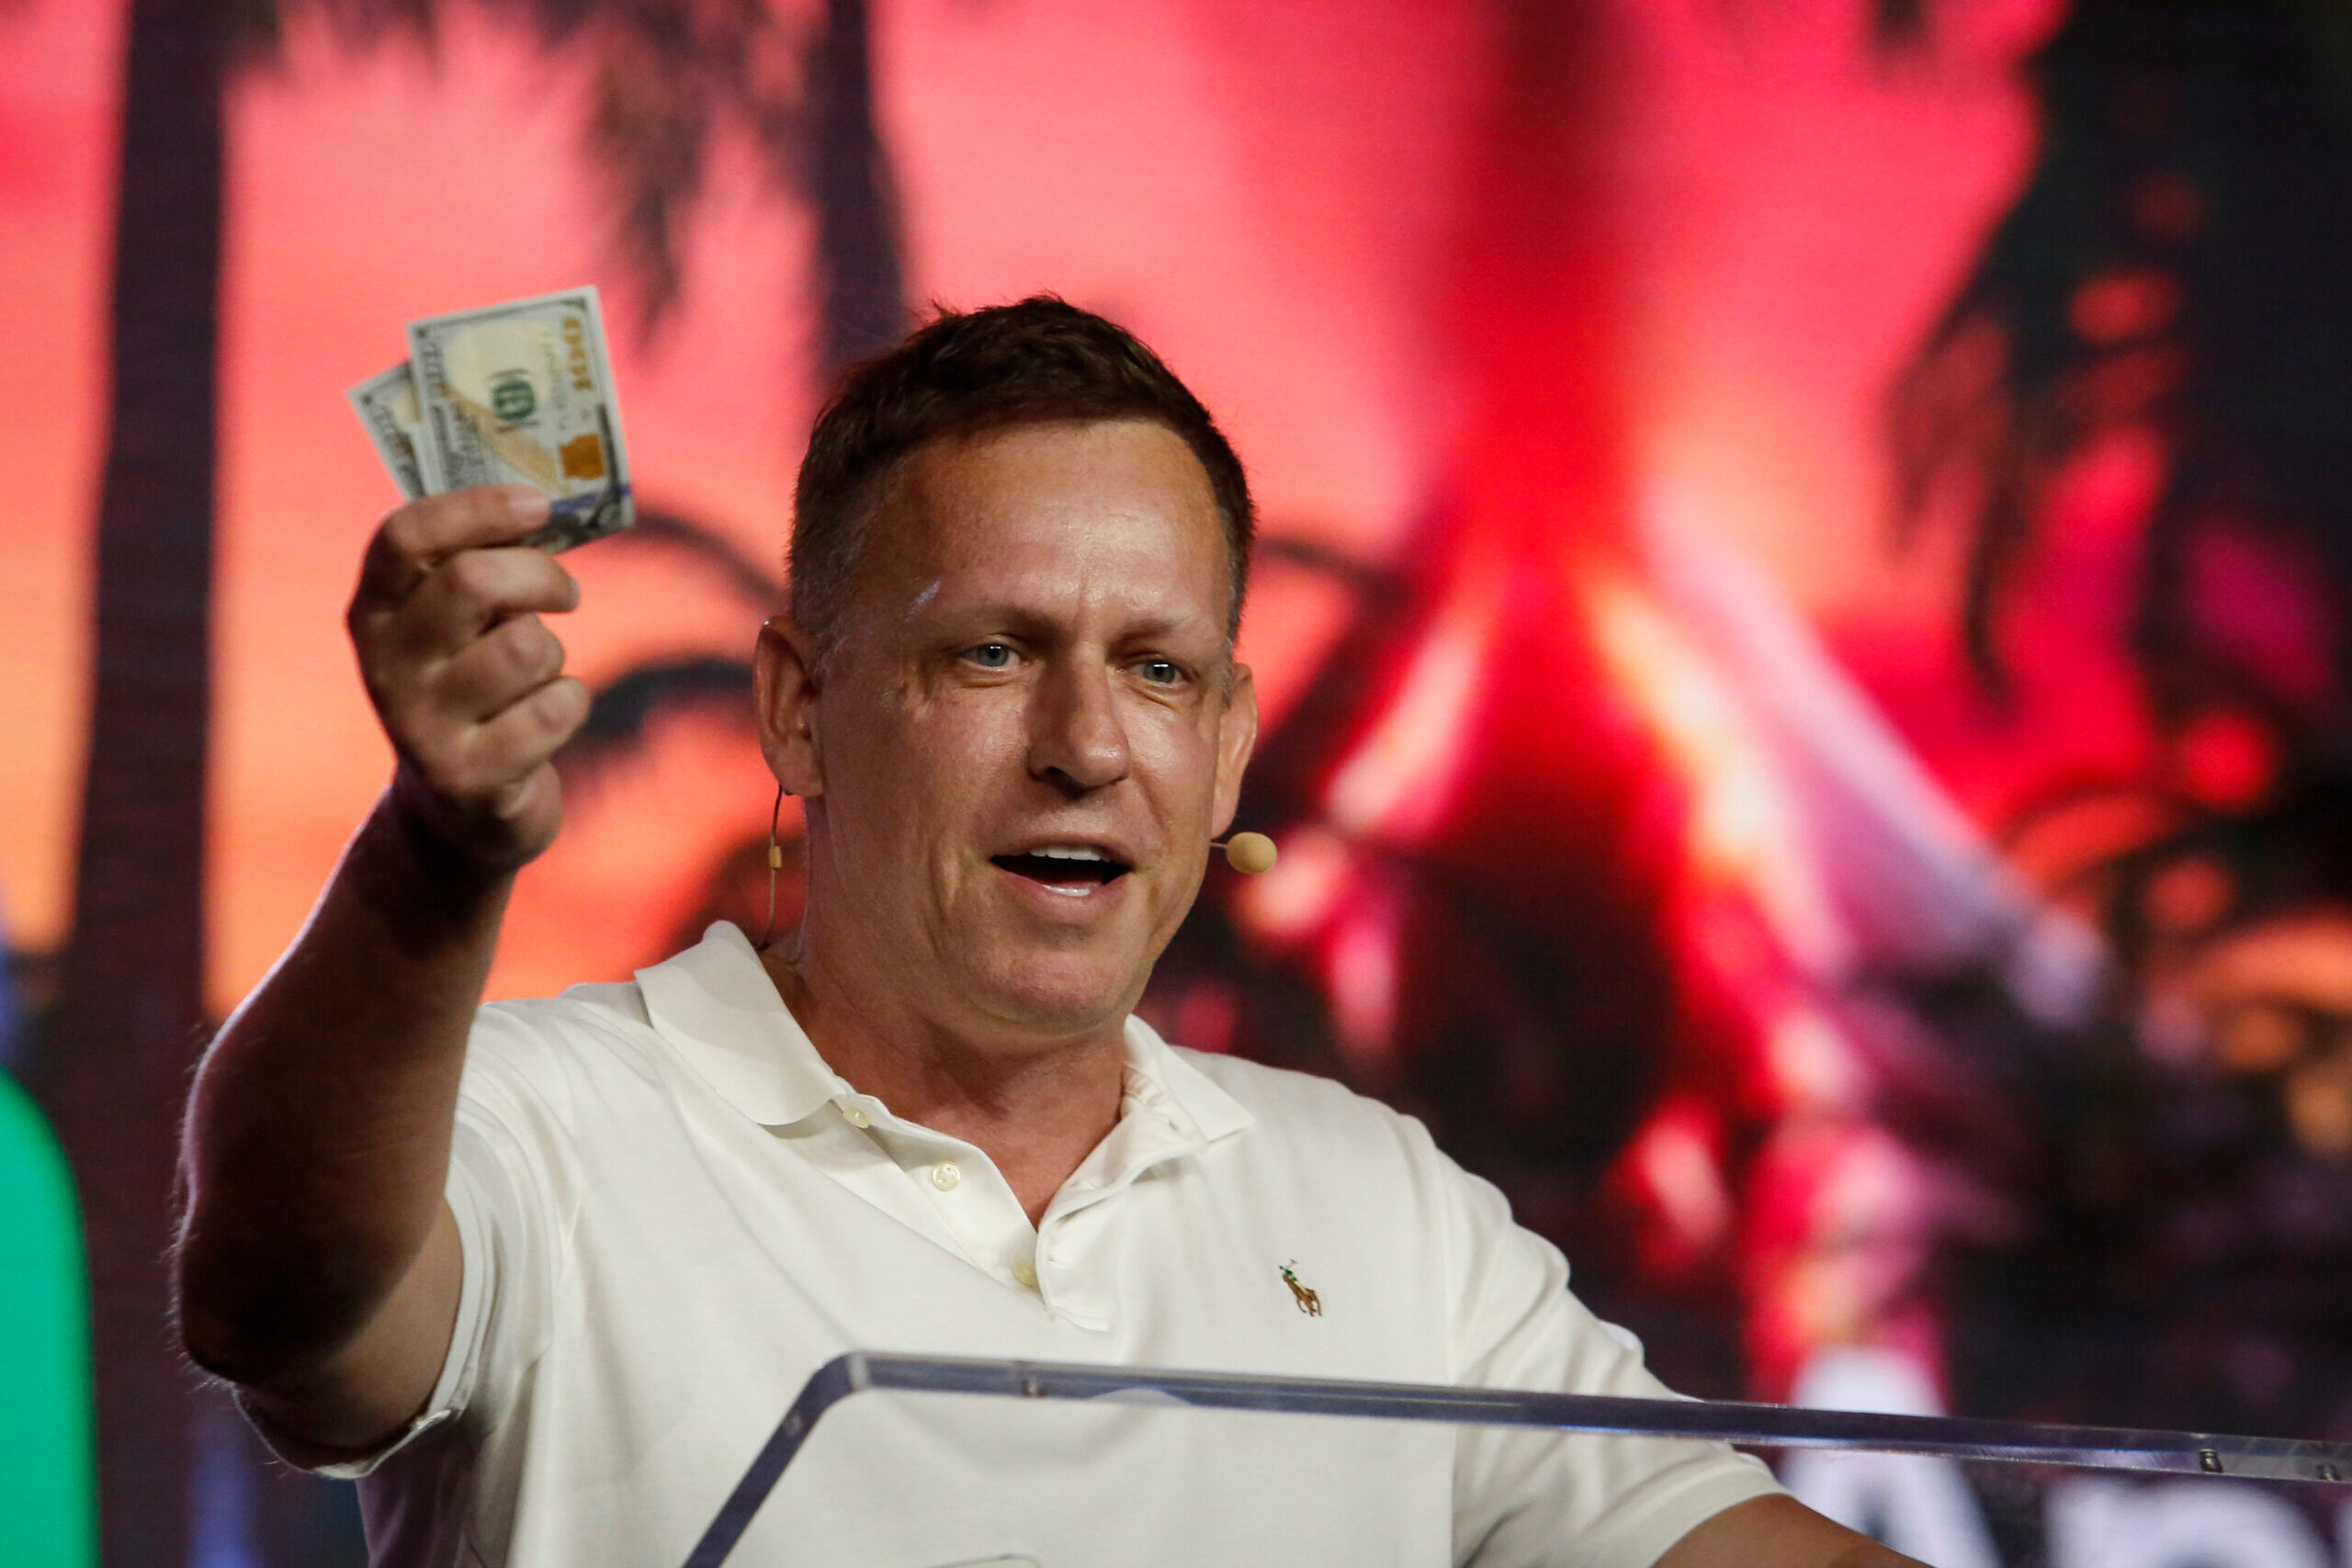 MIAMI, FLORIDA - APRIL 7: Peter Thiel, co-founder of PayPal, Palantir Technologies, and Founders Fund, holds hundred dollar bills as he speaks during the Bitcoin 2022 Conference at Miami Beach Convention Center on April 7, 2022 in Miami, Florida. The worlds largest bitcoin conference runs from April 6-9, expecting over 30,000 people in attendance and over 7 million live stream viewers worldwide.(Photo by Marco Bello/Getty Images)